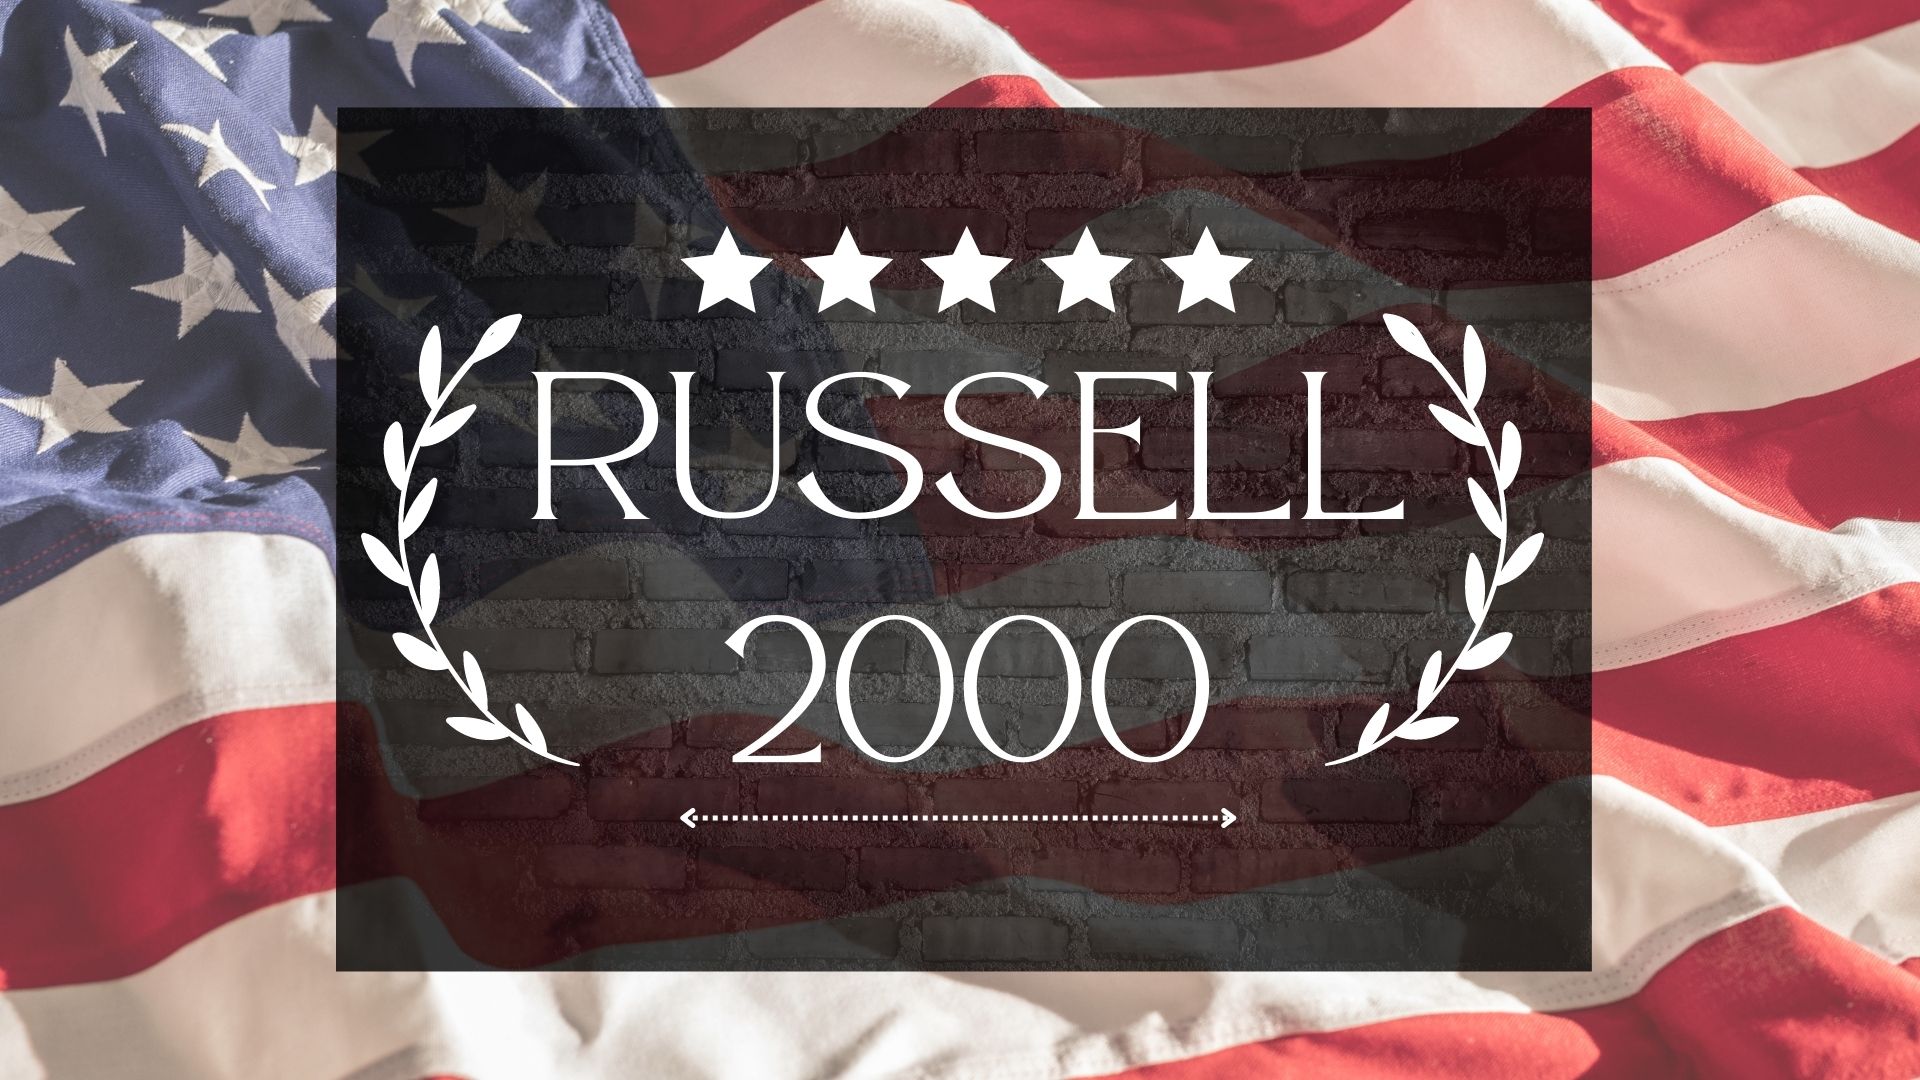 RUSSELL2000